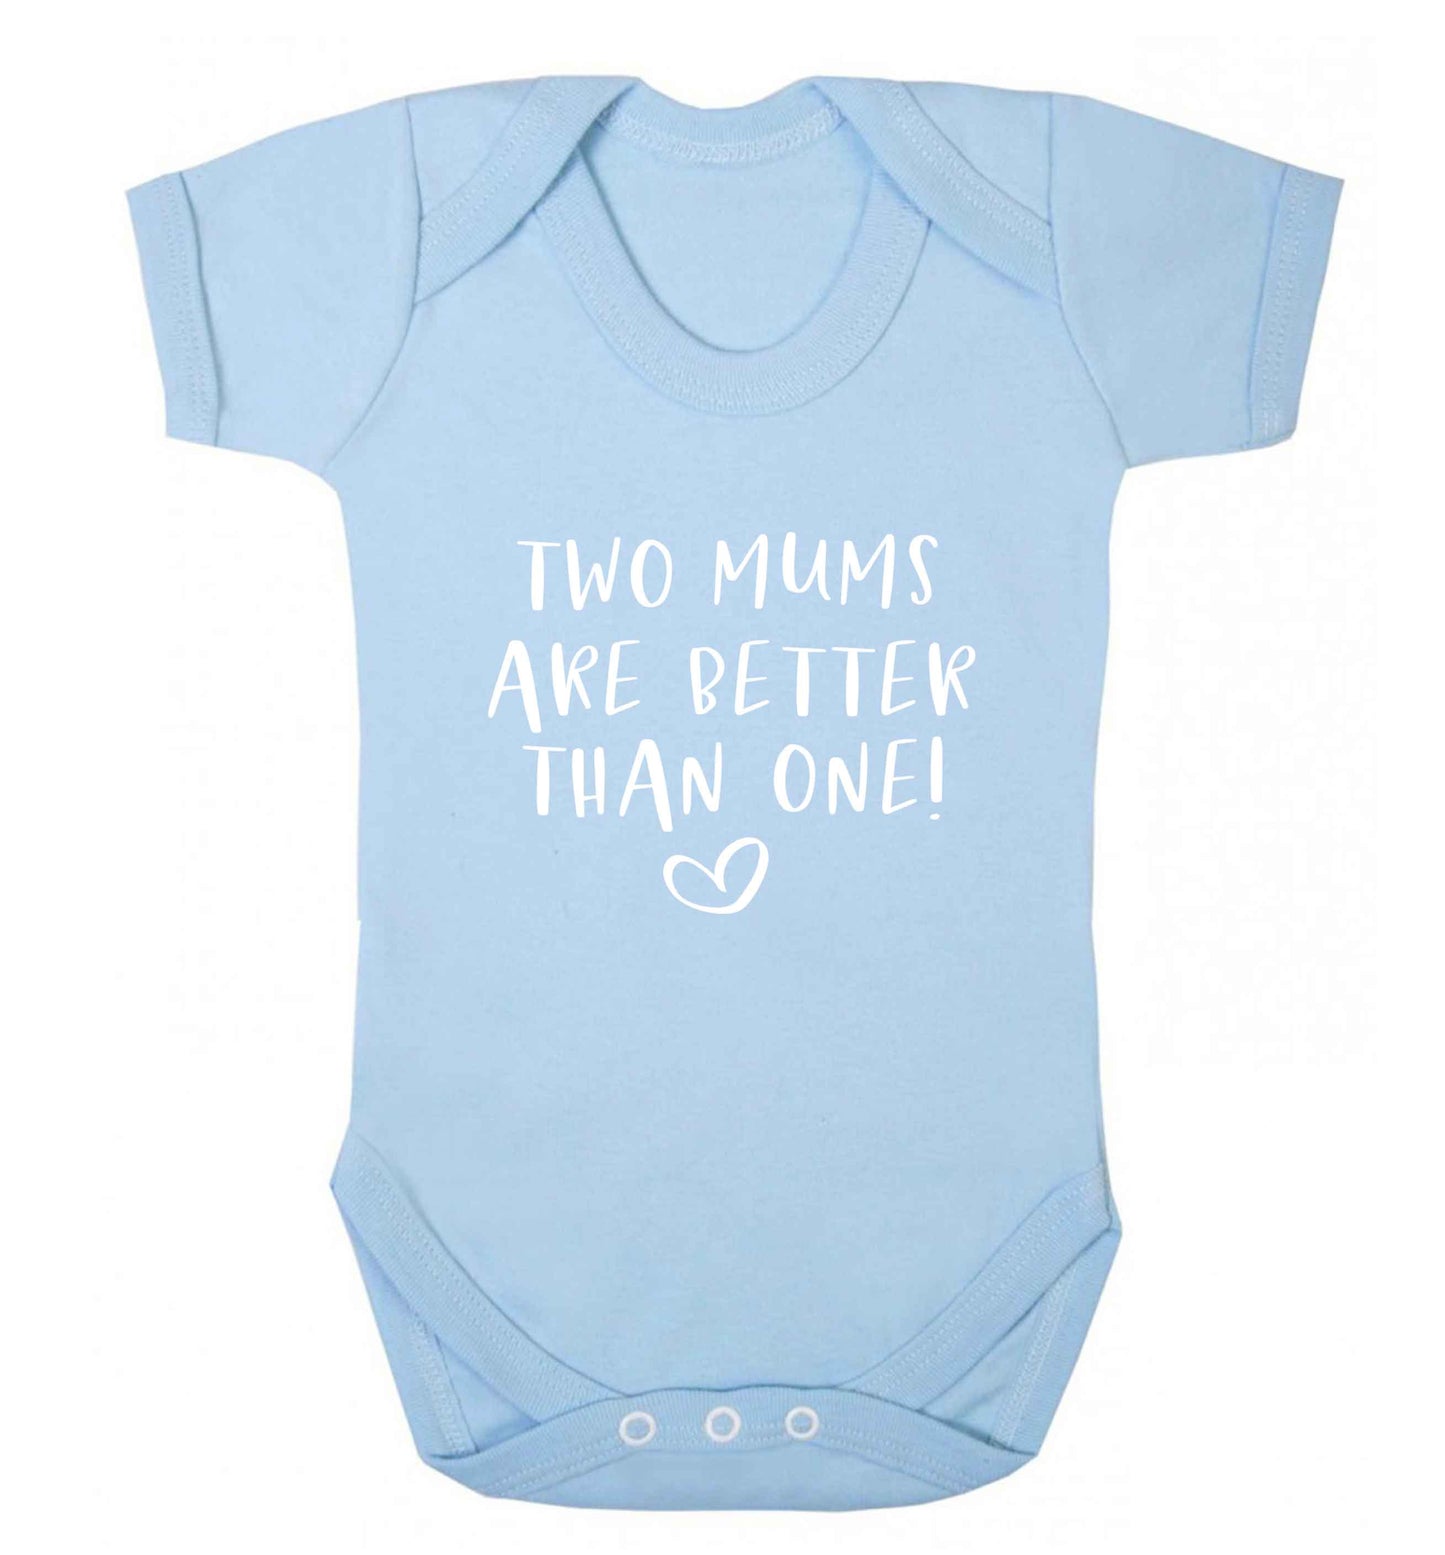 Two mums are better than one baby vest pale blue 18-24 months